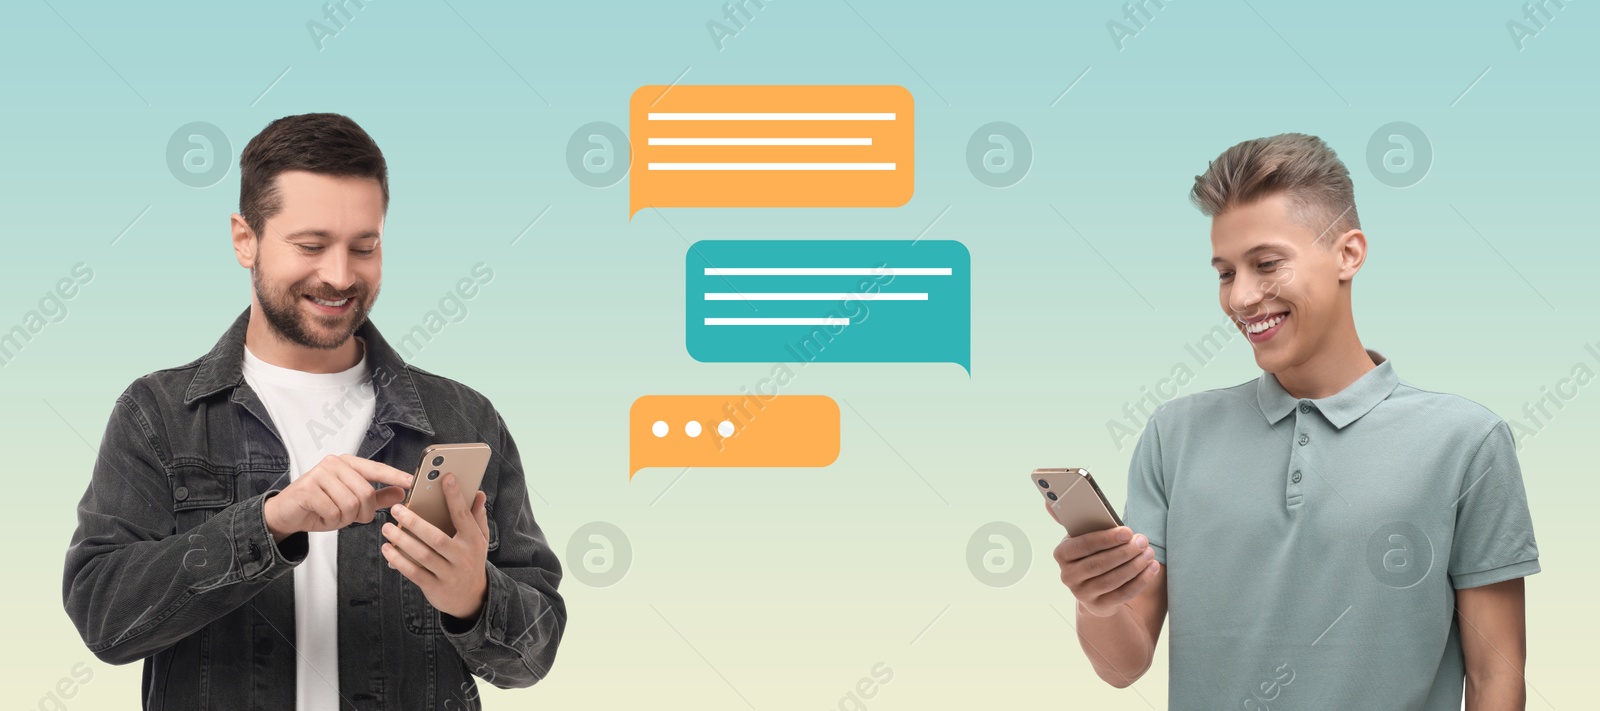 Image of Men with smartphones texting on color gradient background, banner design. Message bubbles between them